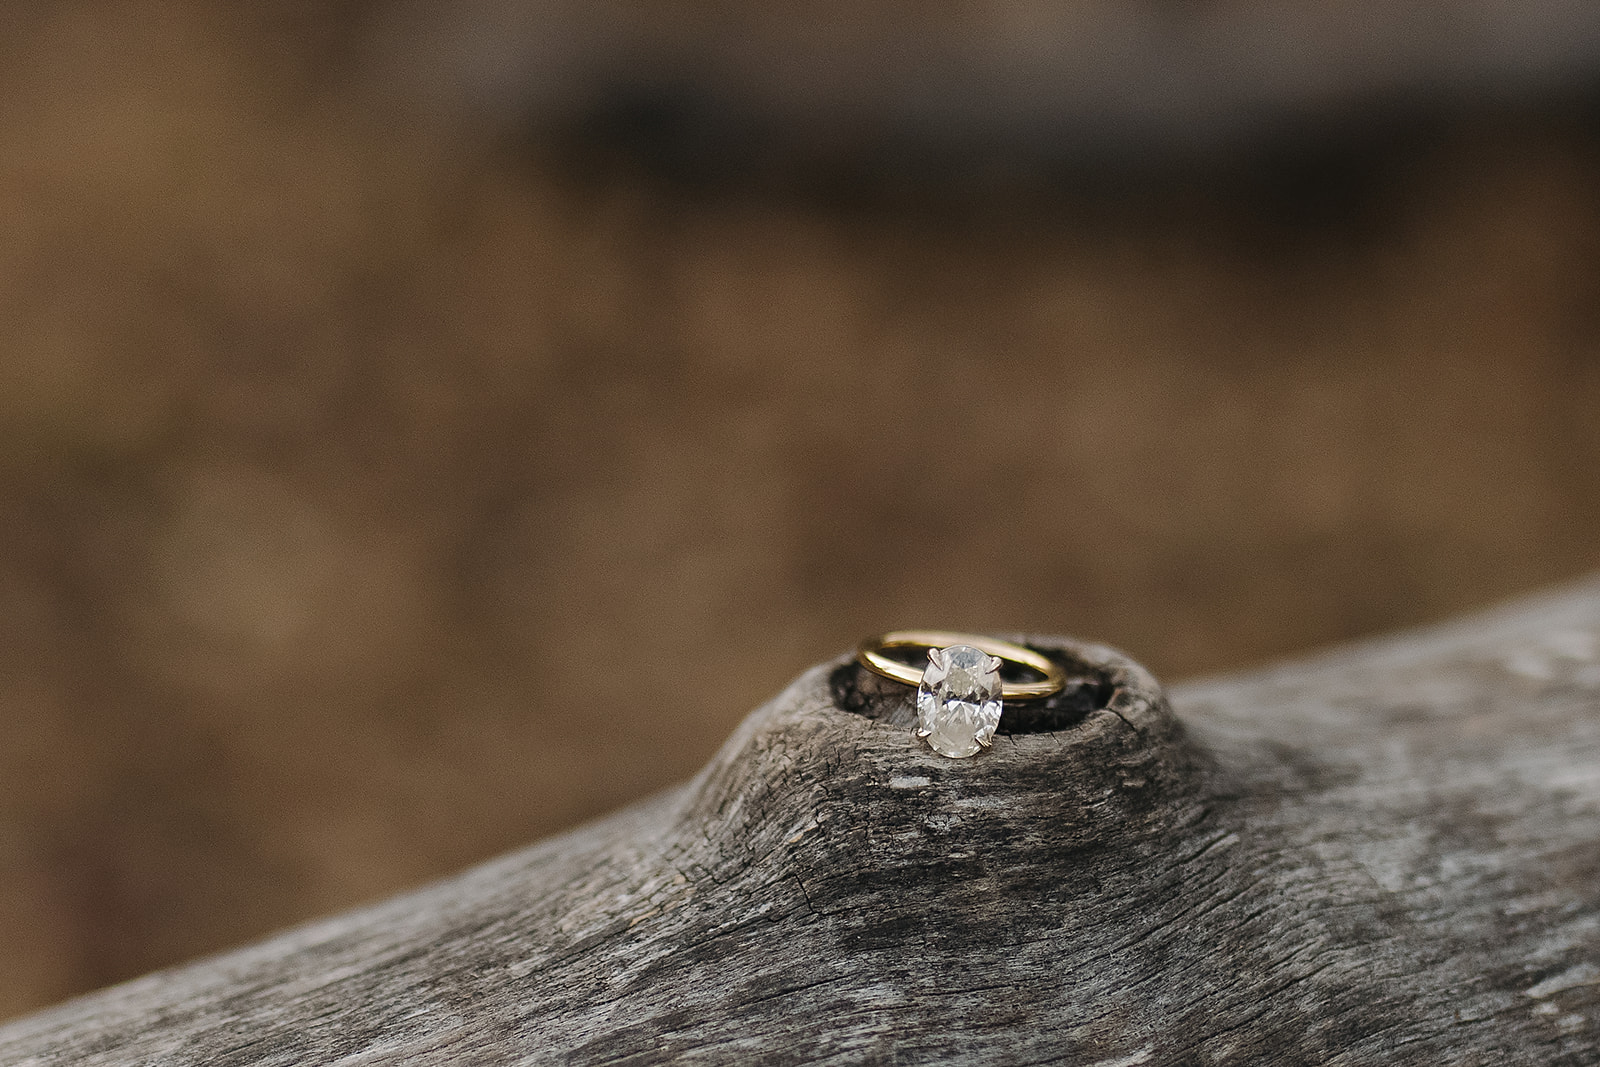 Stunning oval cut diamond engagement ring on gold band detail shot during engagement session in the Colorado Forrest